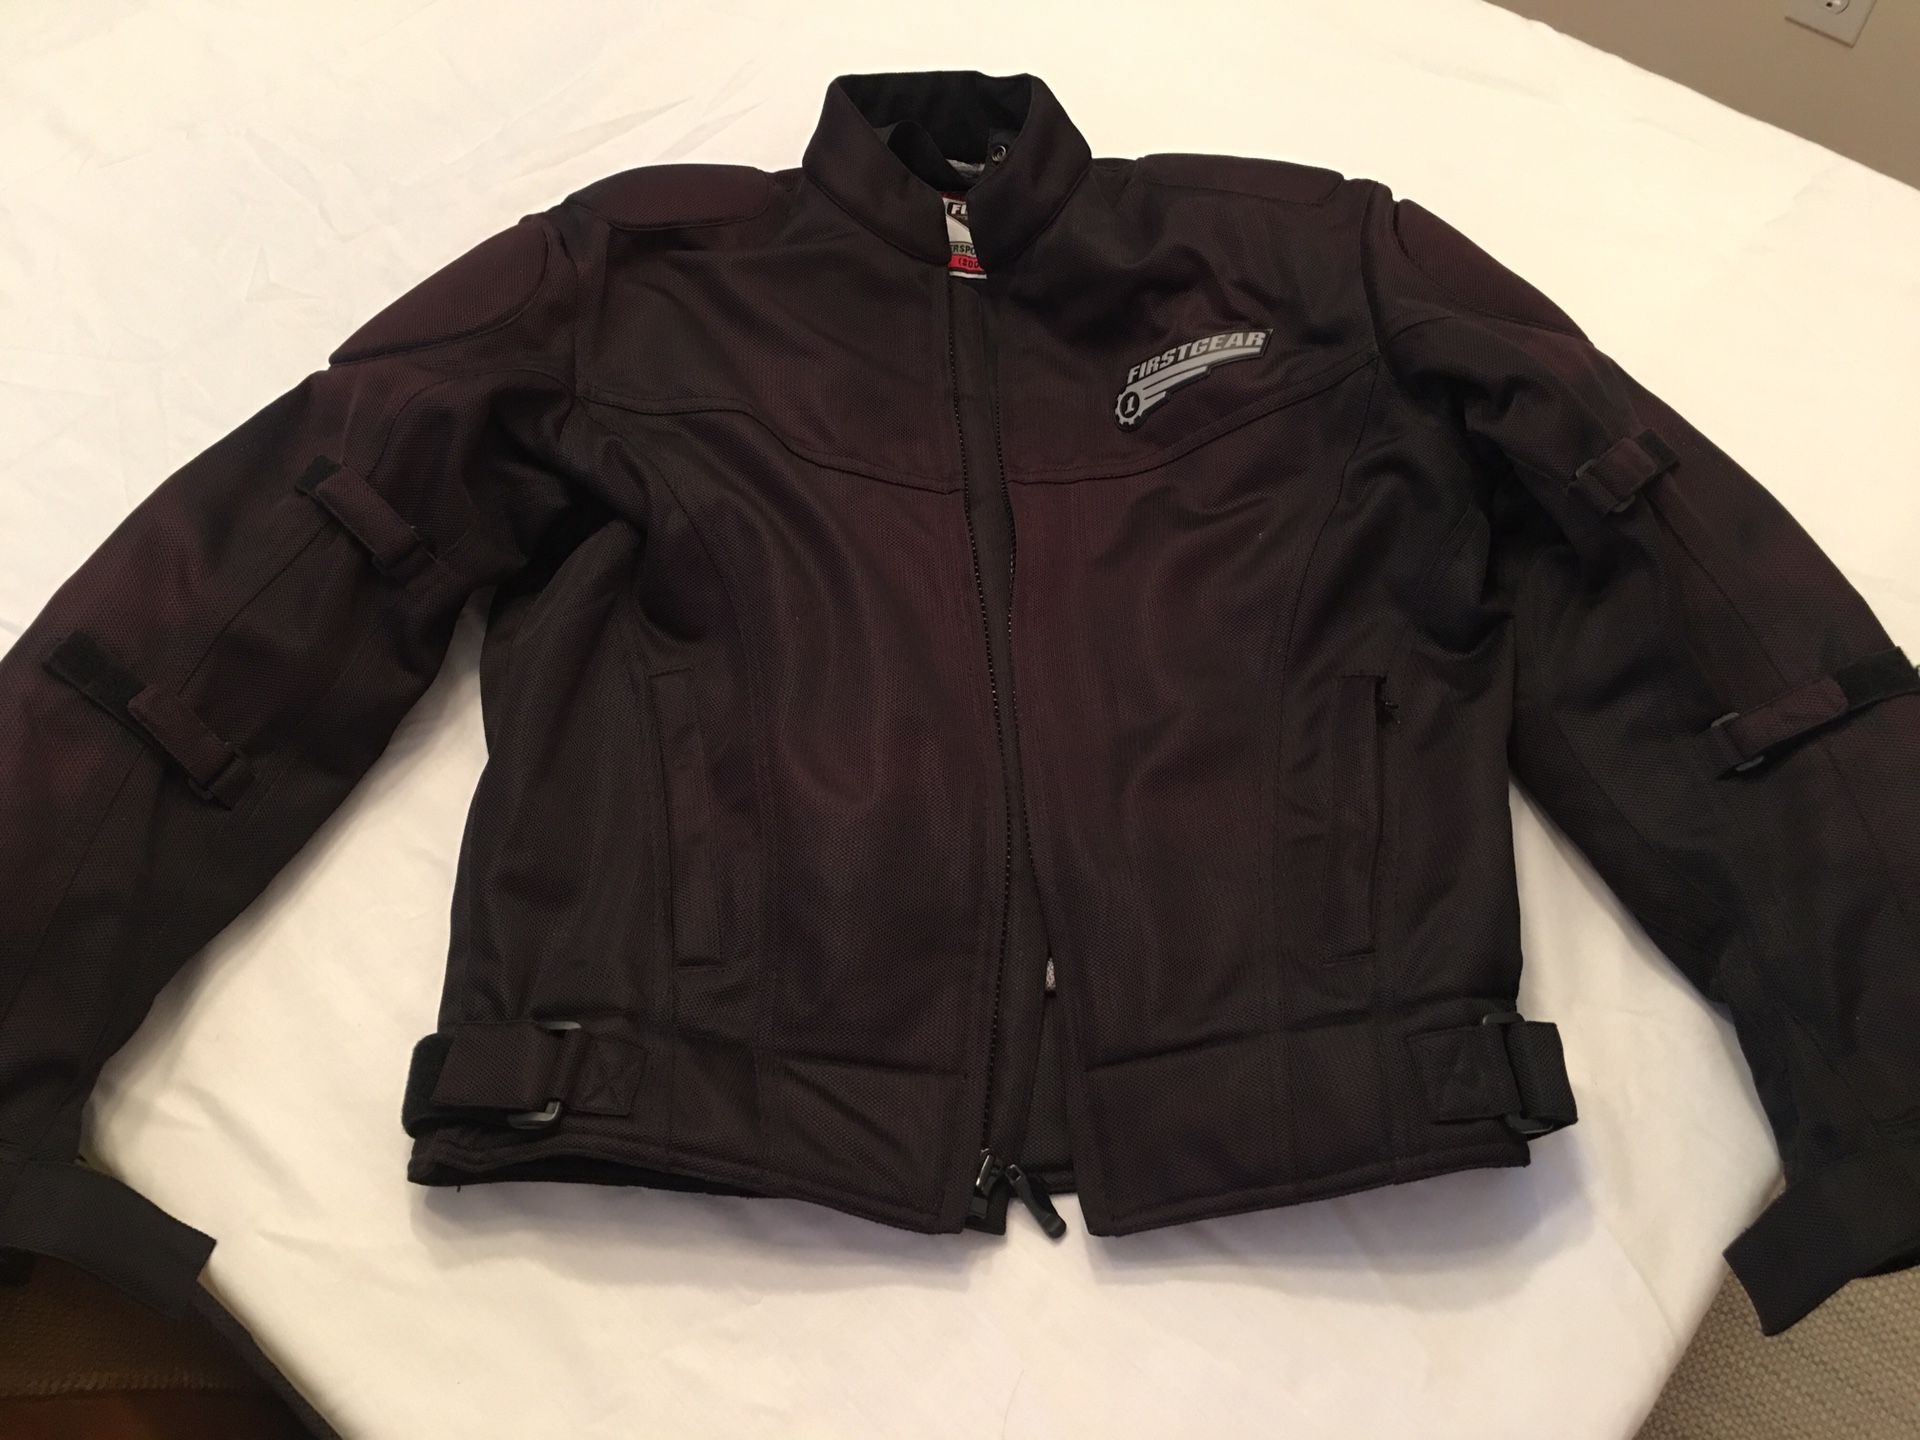 First Gear Black Motorcycle Jacket